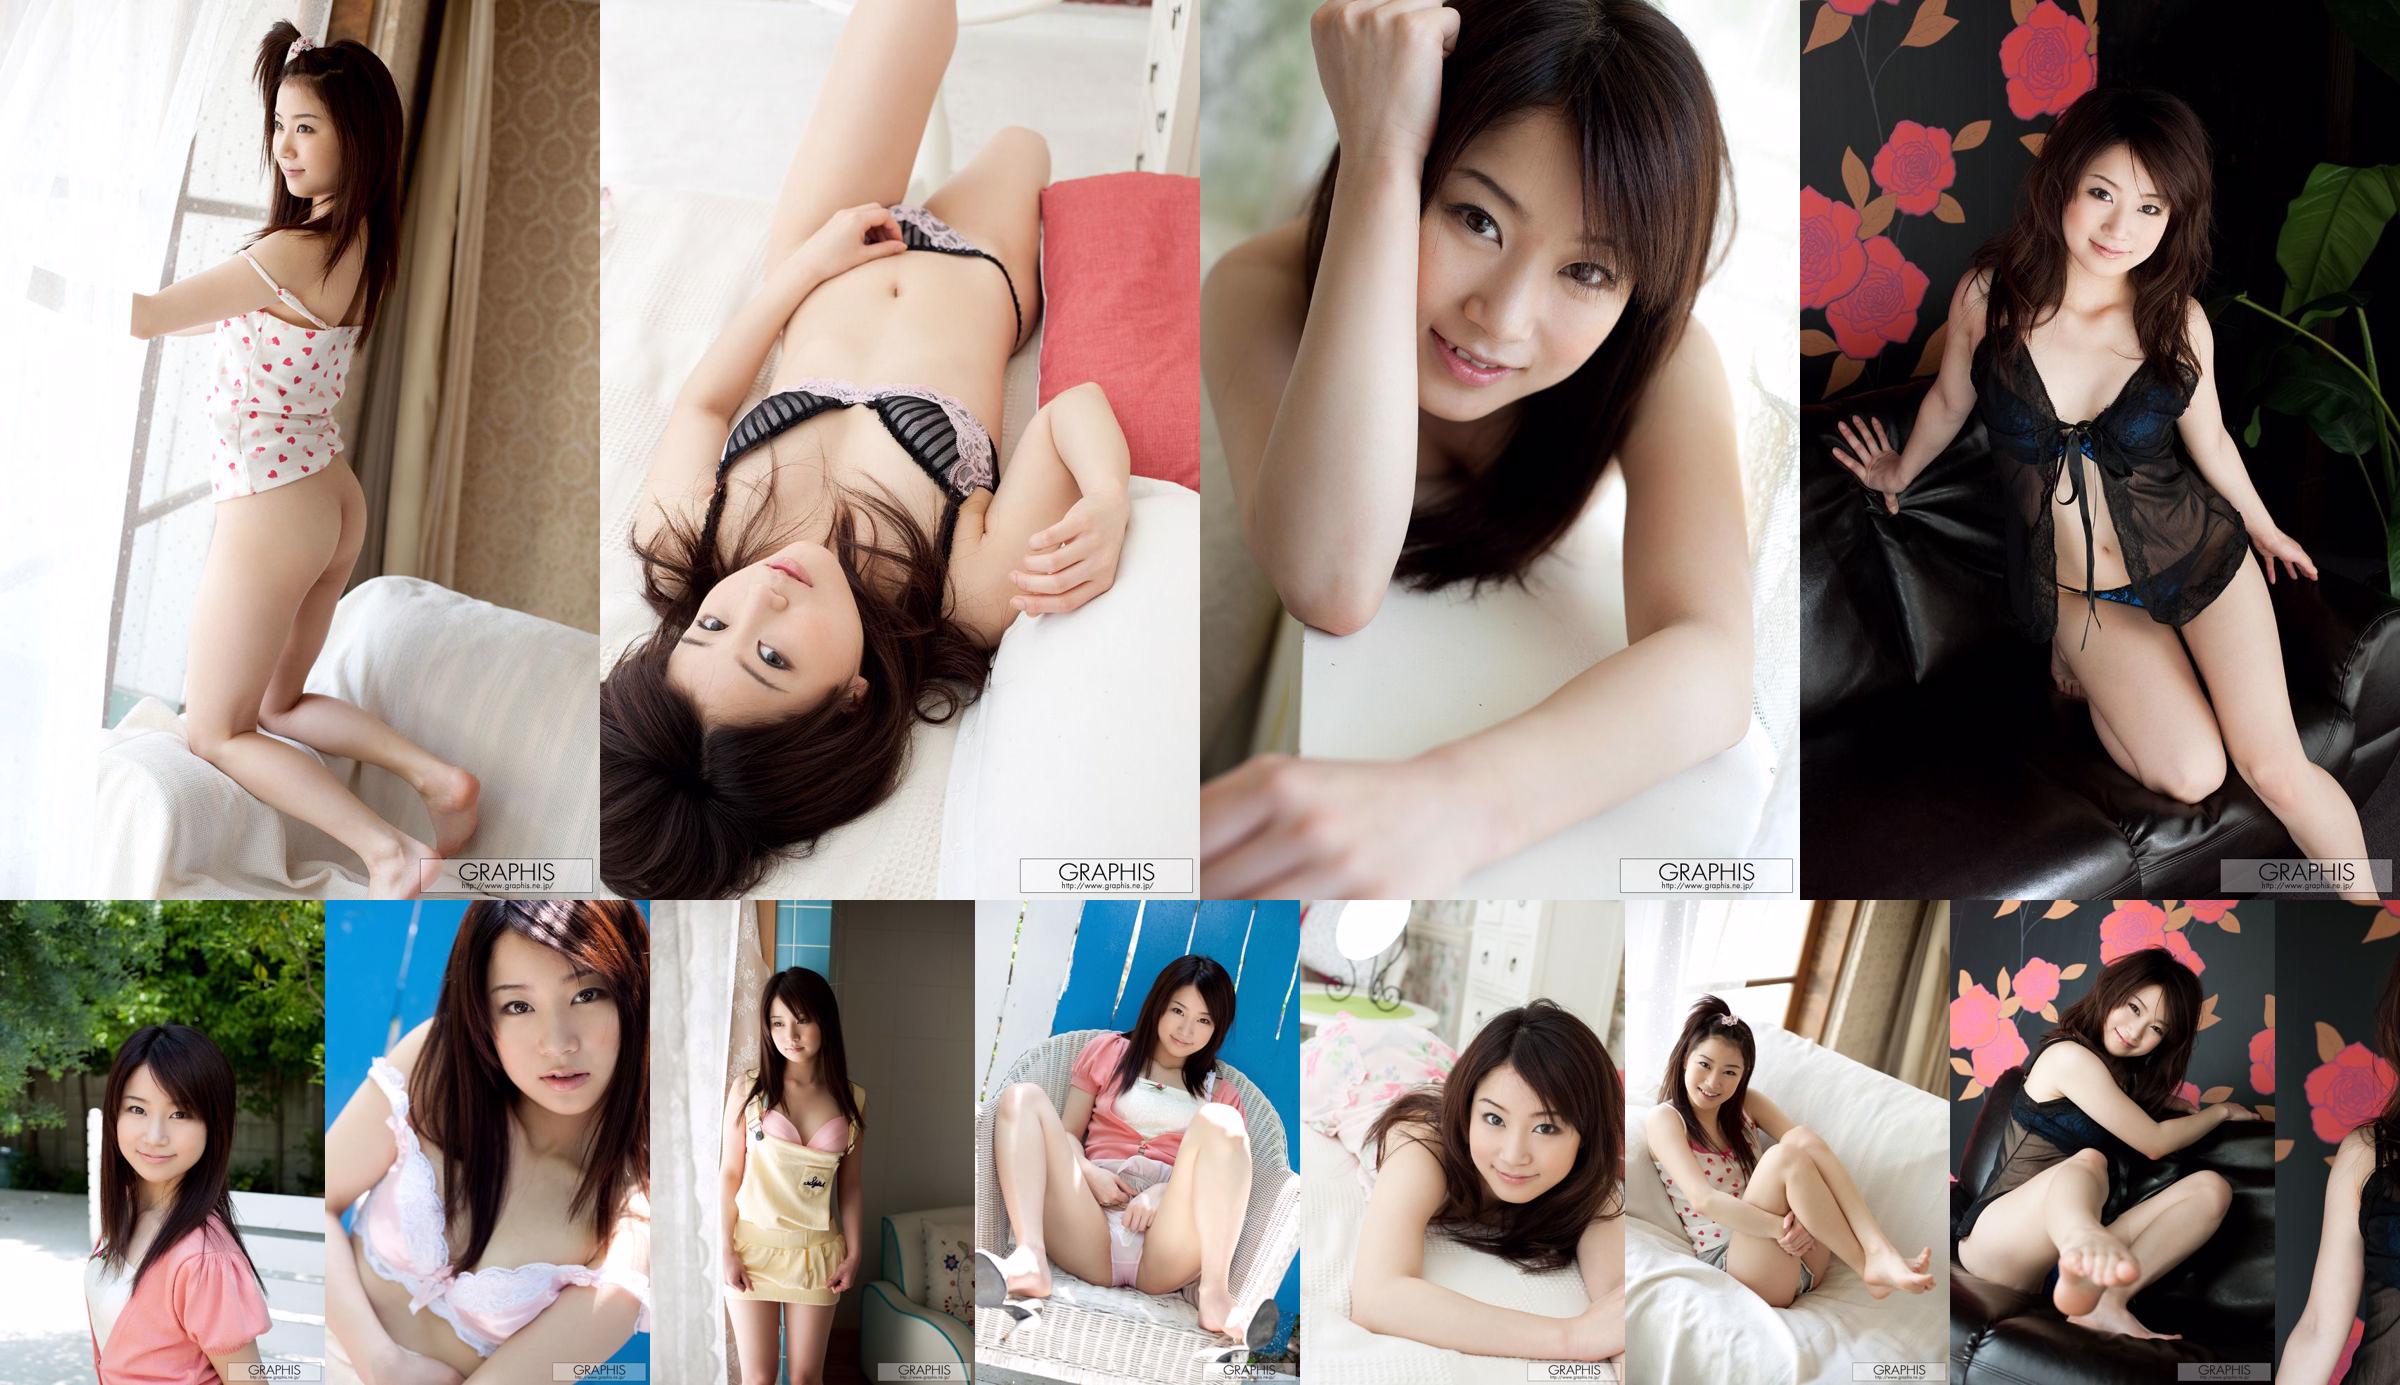 Aiyin まひろ/ Aiyin Zhenxun "Sweet Candy" [Graphis] Gals No.8d9e1d Page 7